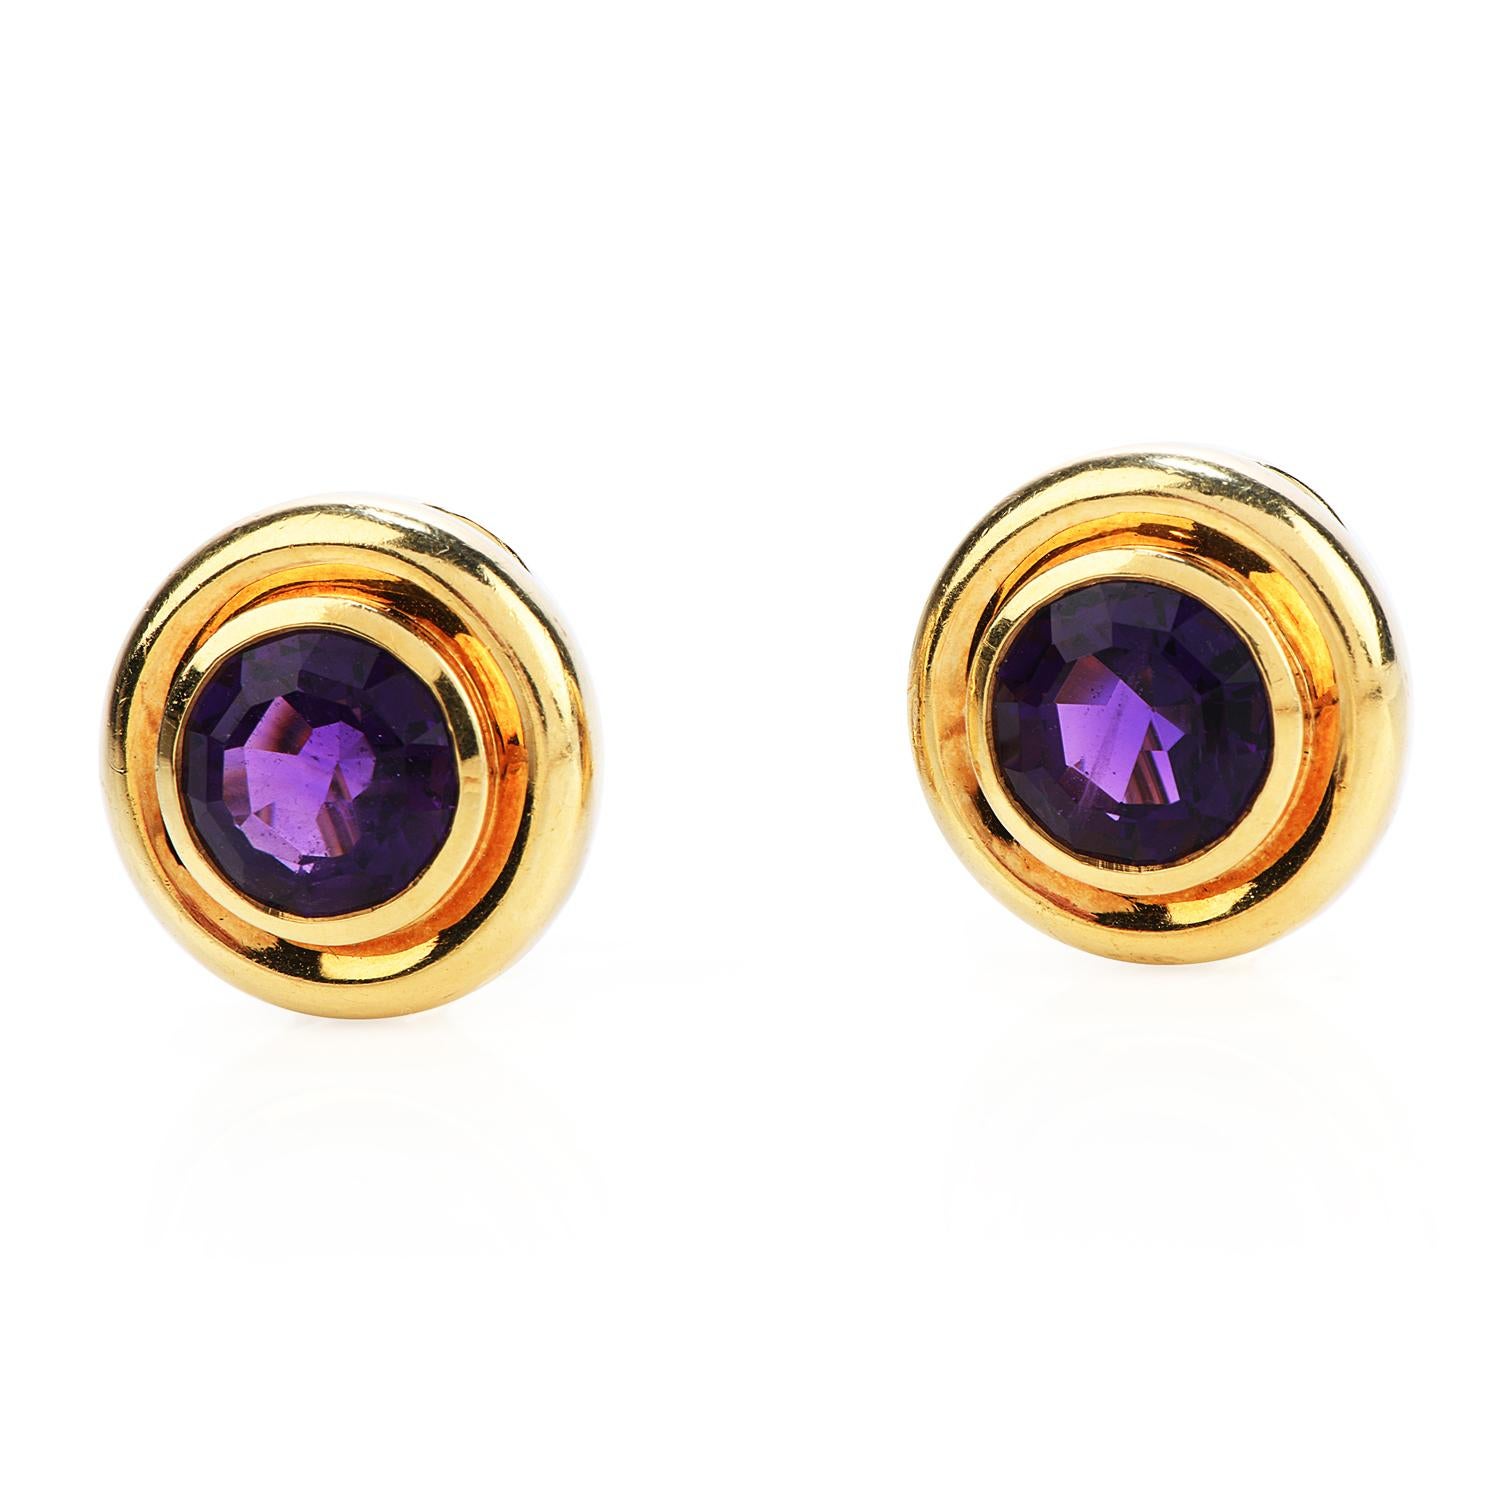 Vintage Tiffany & co. 1980s clip-on earrings, elegant and timeless.

Crafted in solid 18K yellow gold, with a beautiful color display there are (2) round-cut, bezel-set, Amethysts weighing approximately 4.00 carats 

They measure approximately 16